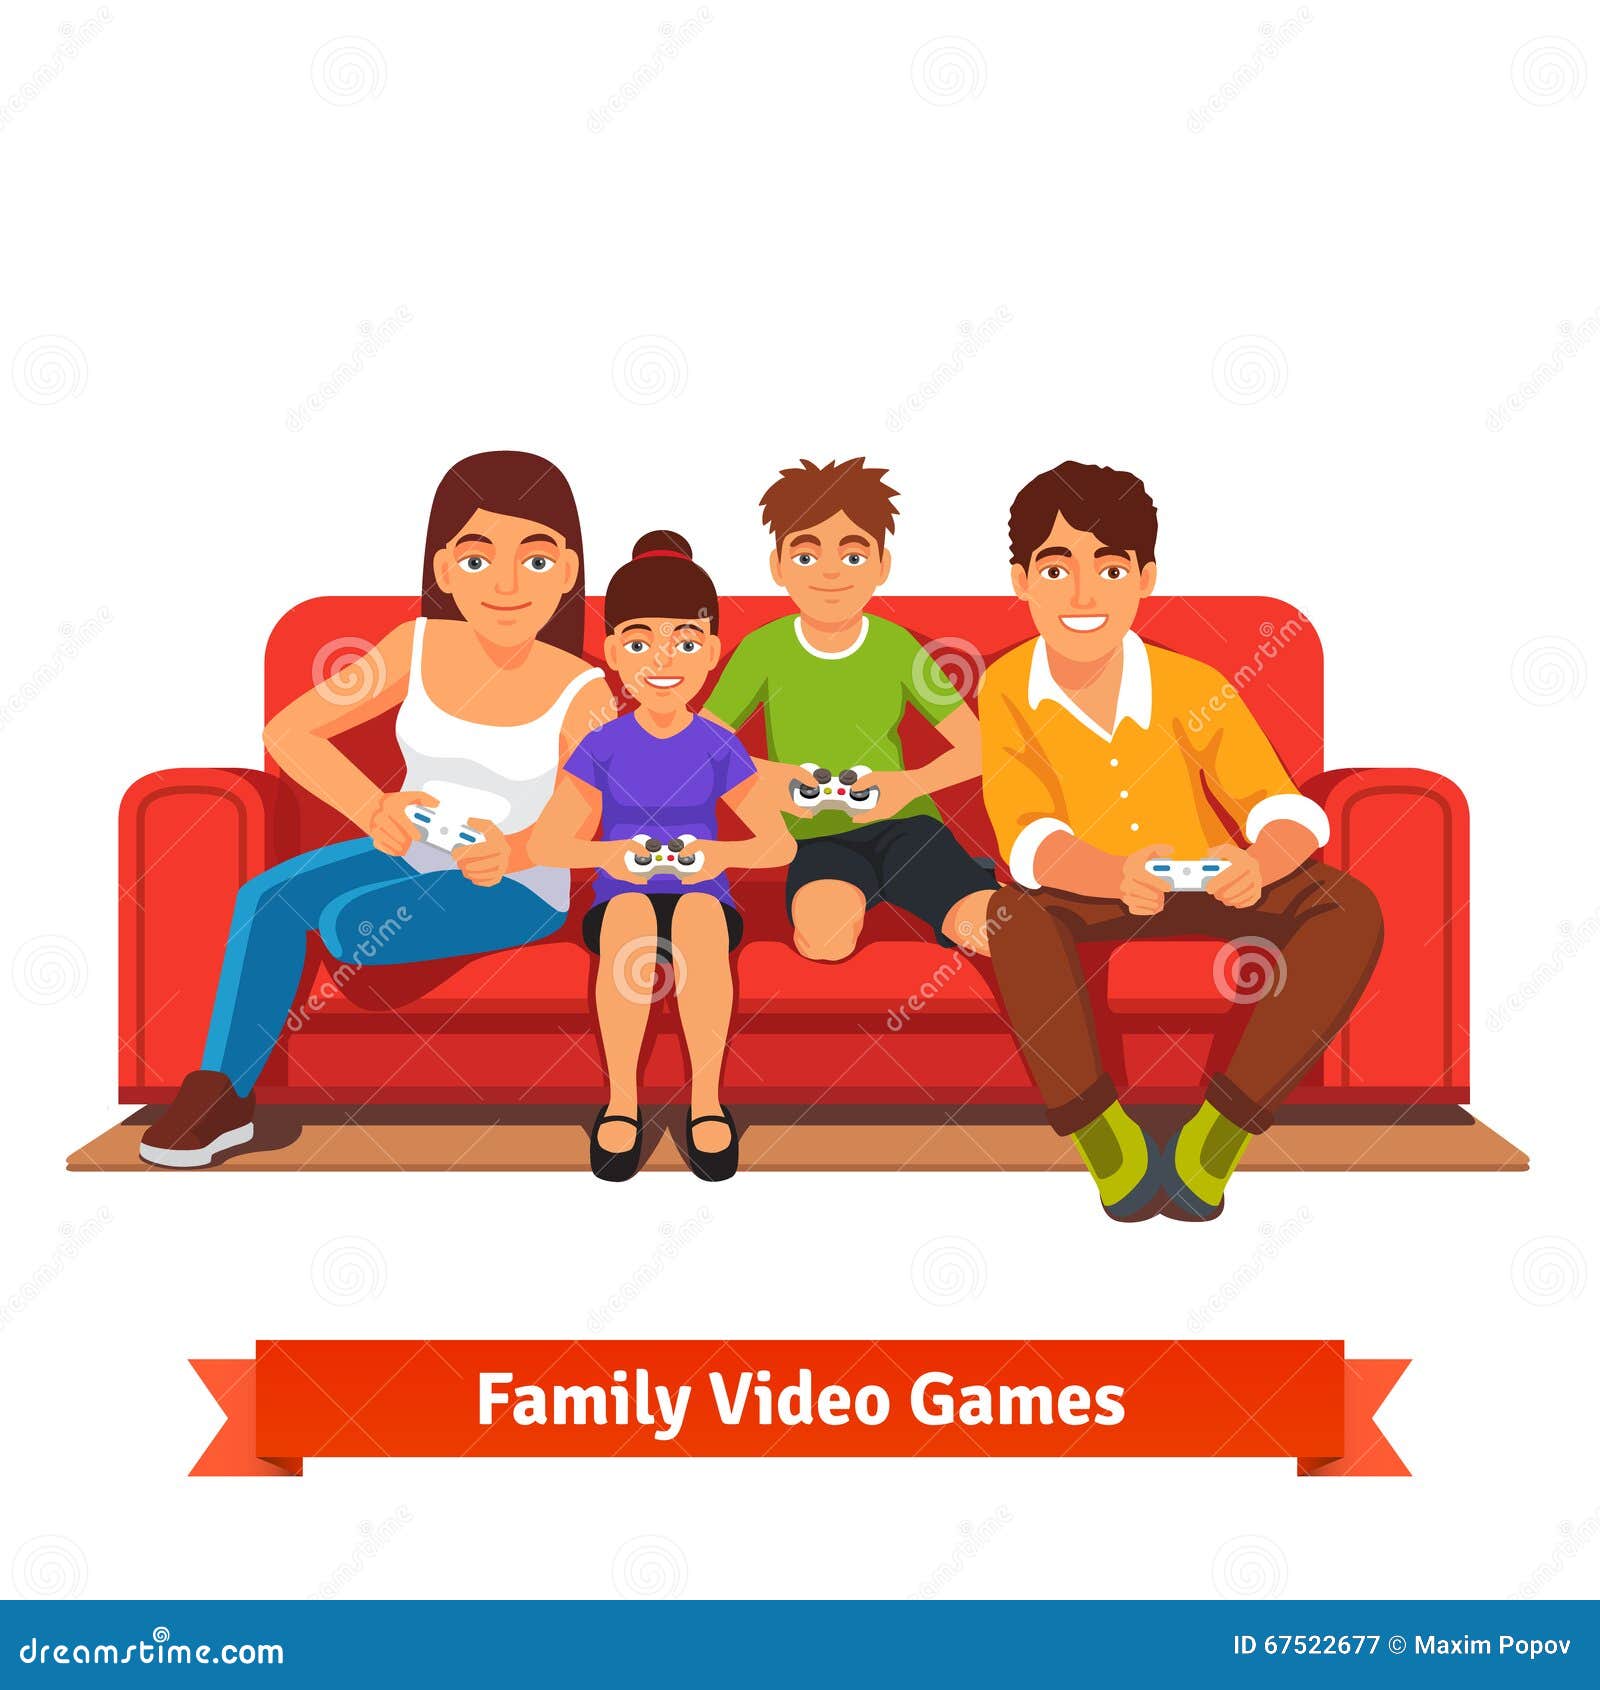 Family Video Games Cliparts, Stock Vector and Royalty Free Family